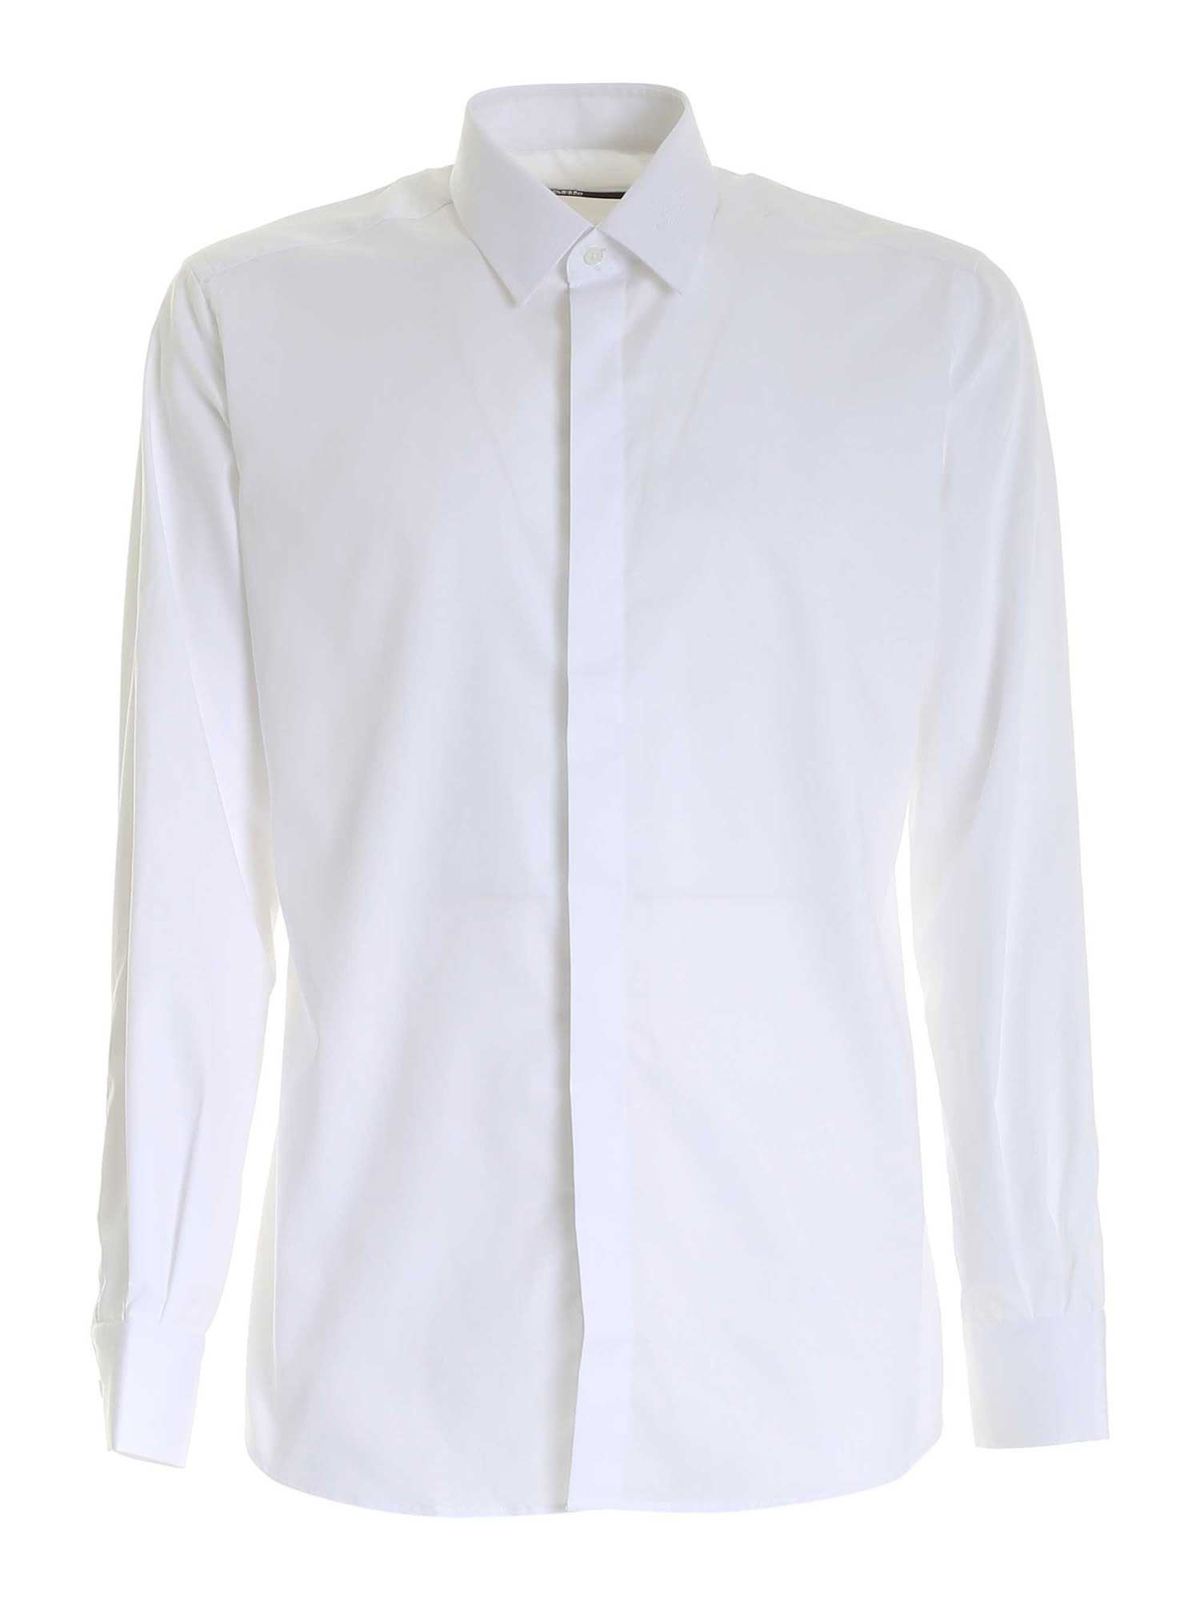 Karl Lagerfeld Logo Embroidery Shirt In White